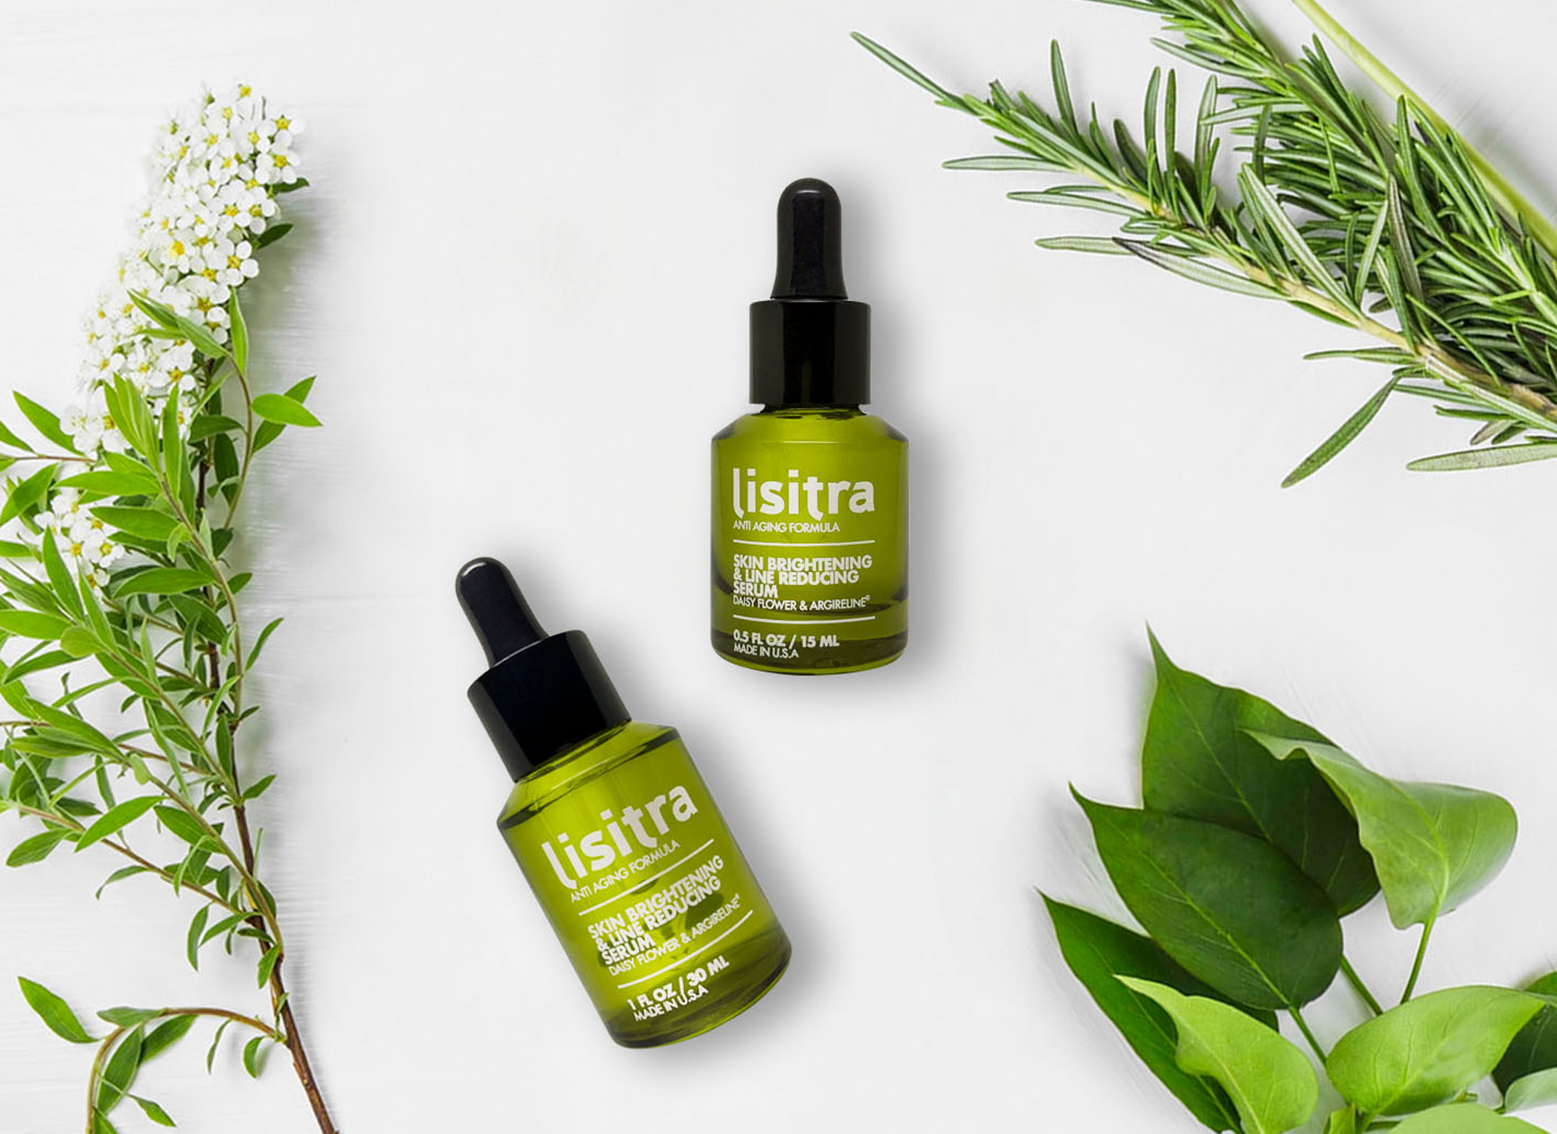 Lisitra . The green anti-aging skincare